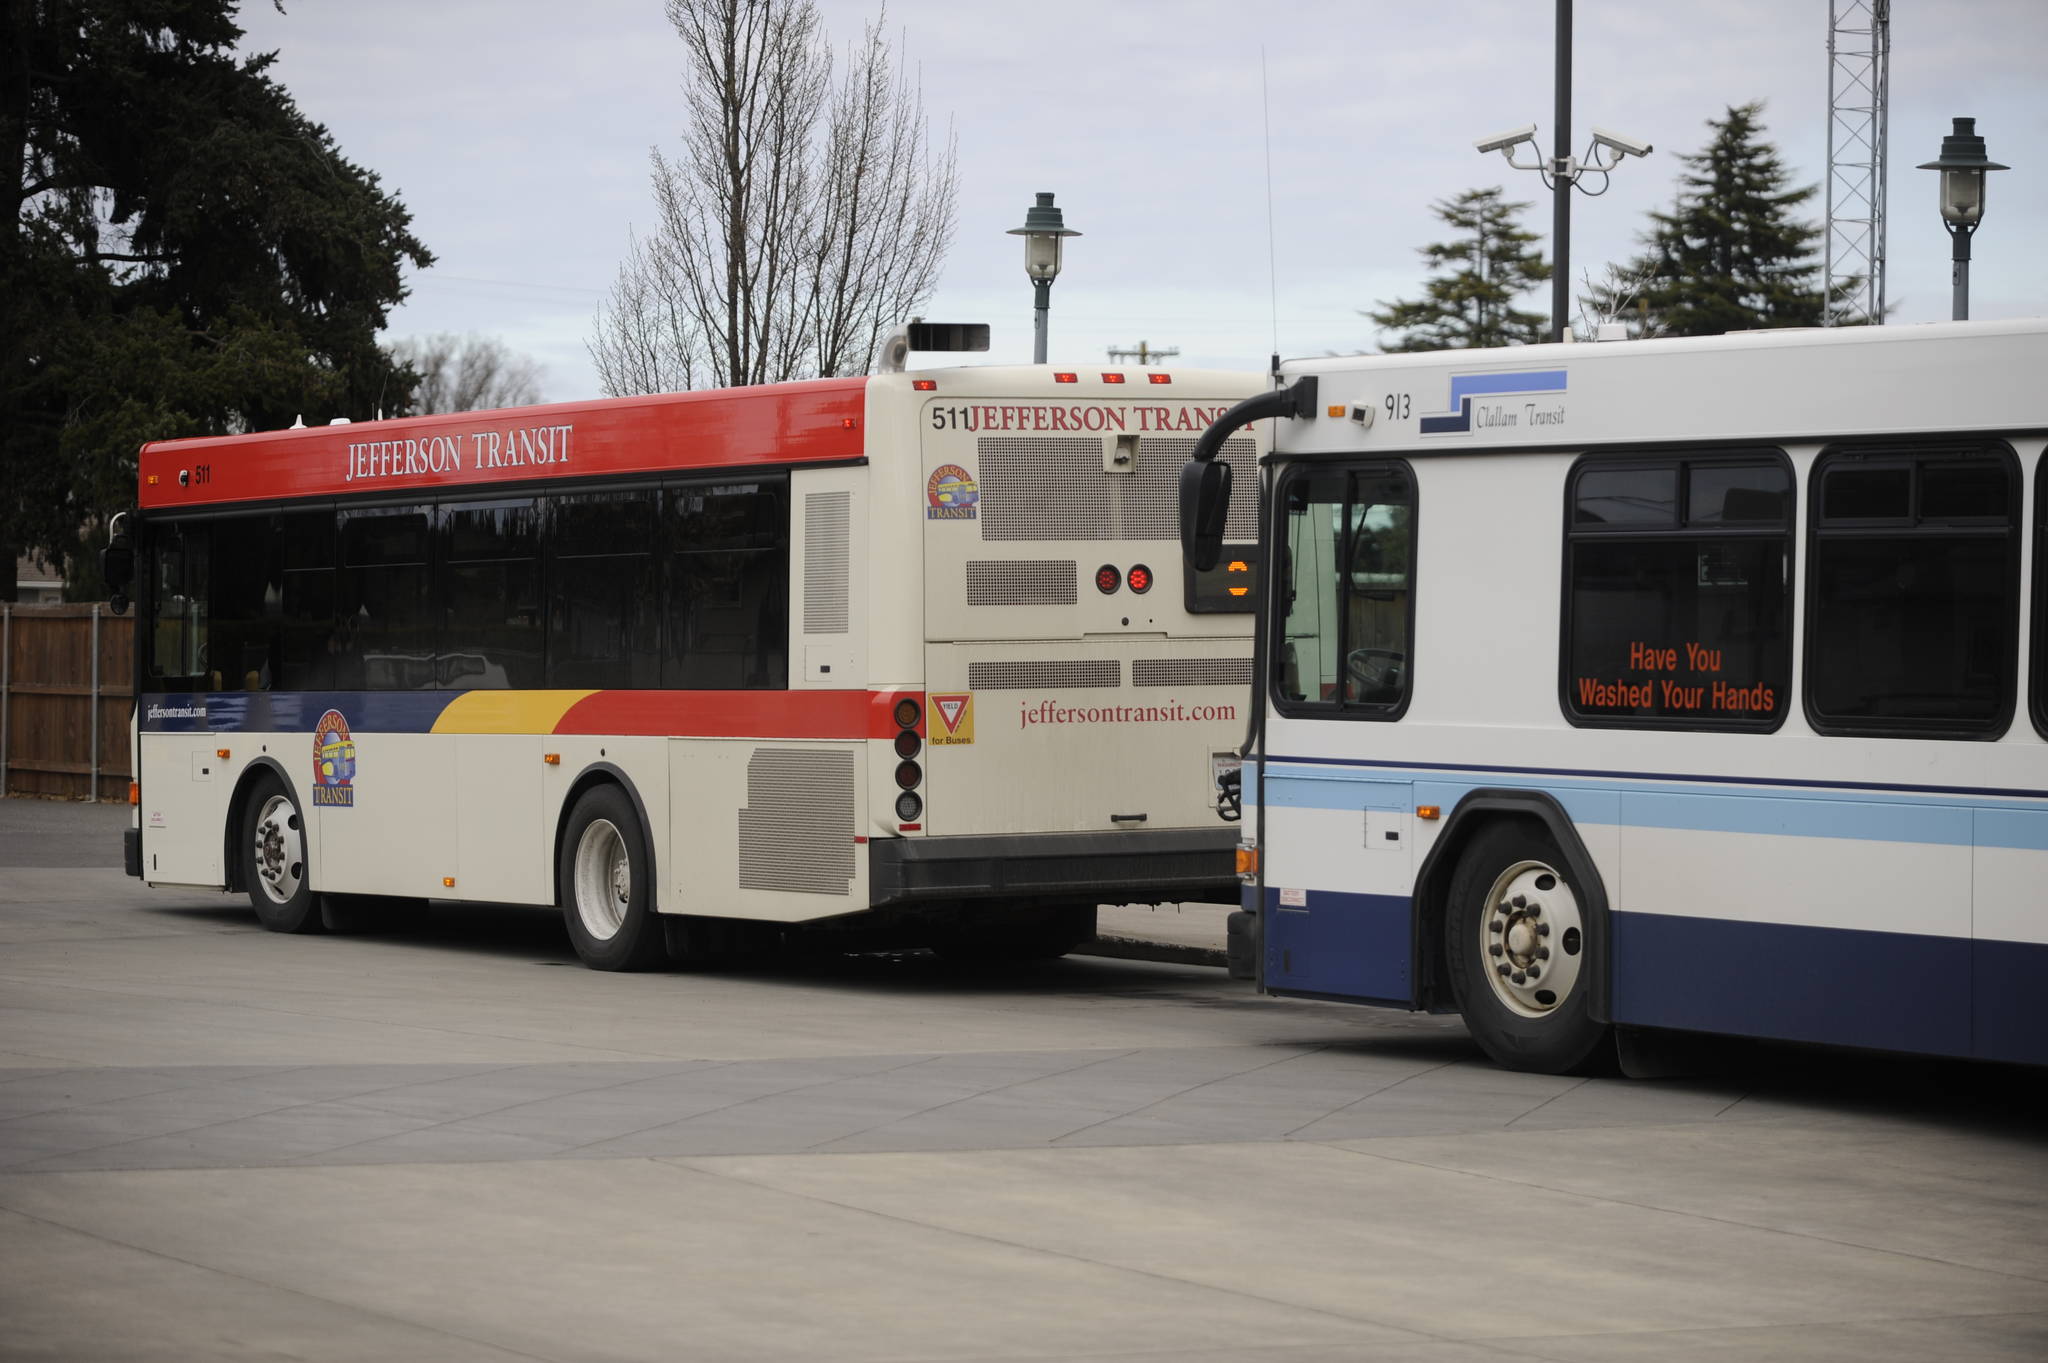 Clallam and Jefferson Transit buses at the Sequim Transit Center last week feature messages about sanitary practices. Sequim Gazette photo by Michael Dashiell